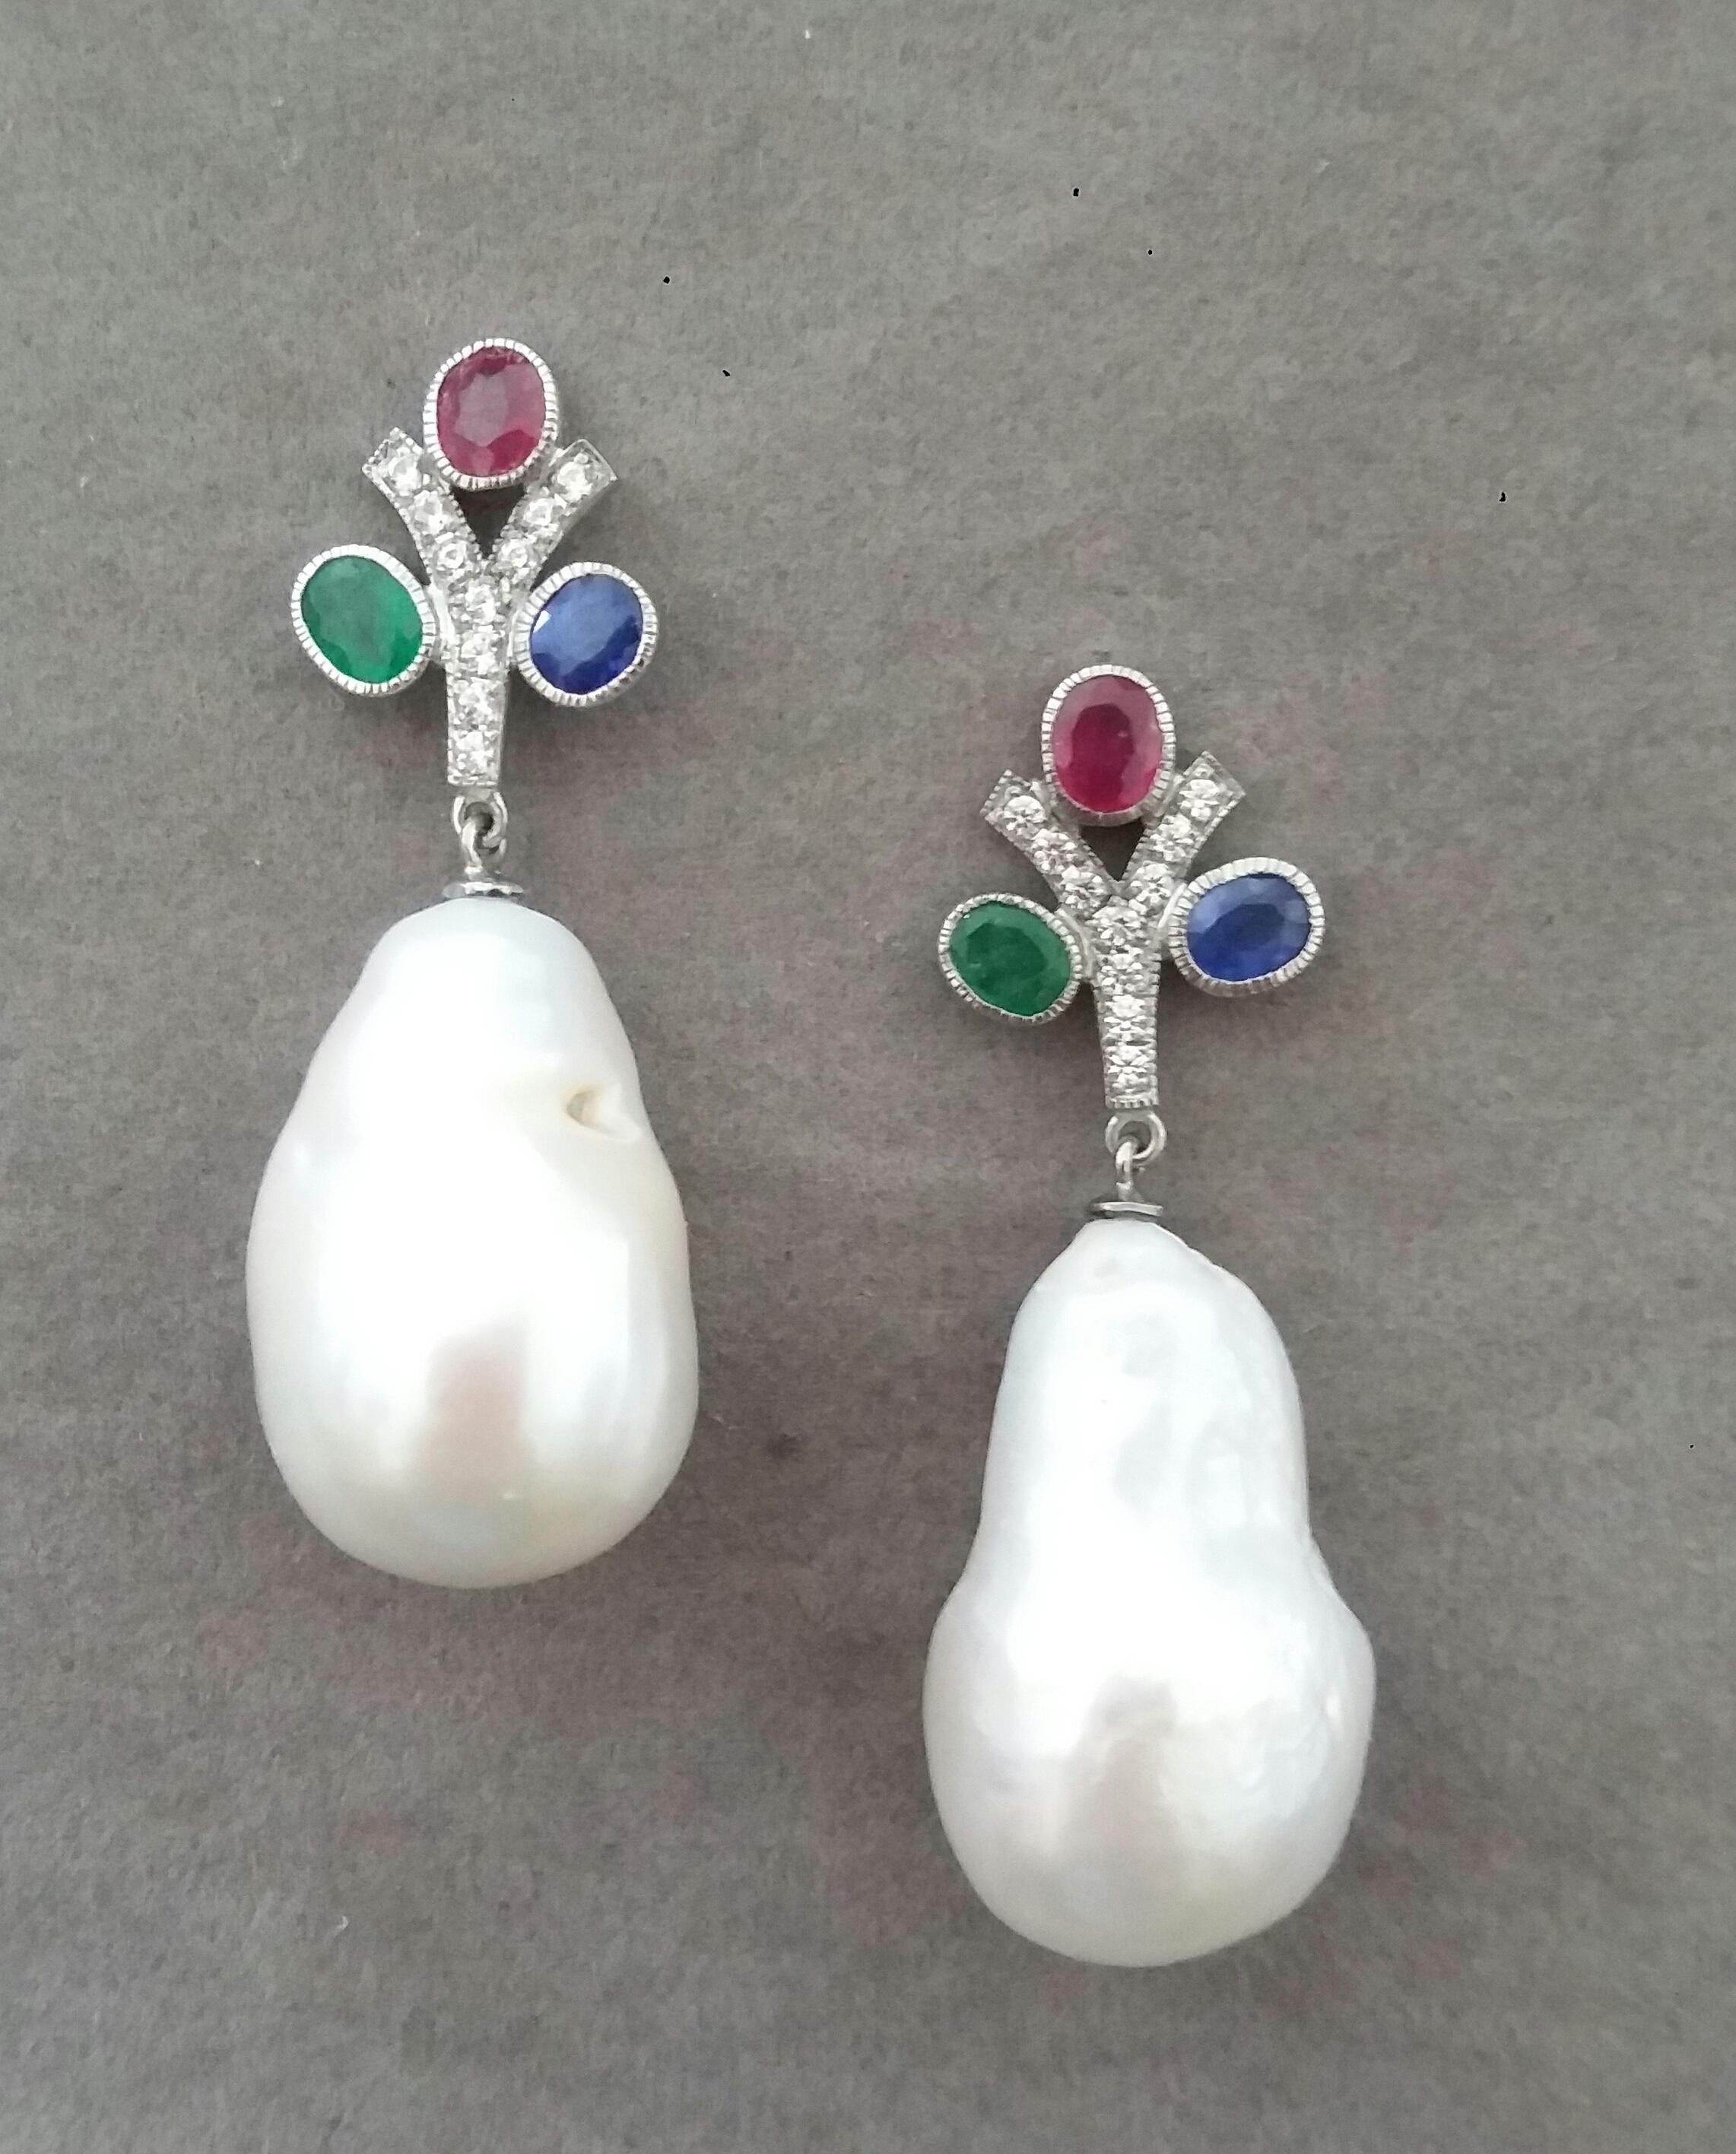 In these classic Tutti Frutti Style earrings the tops are 2 White Gold and Diamonds  Y shape Branches, 20 round full cut diamonds weighing 0,20 carats,and 3 pairs of faceted 4x5 mm. Rubies ,Emeralds and Blue Sapphires ,in the lower parts we have 2